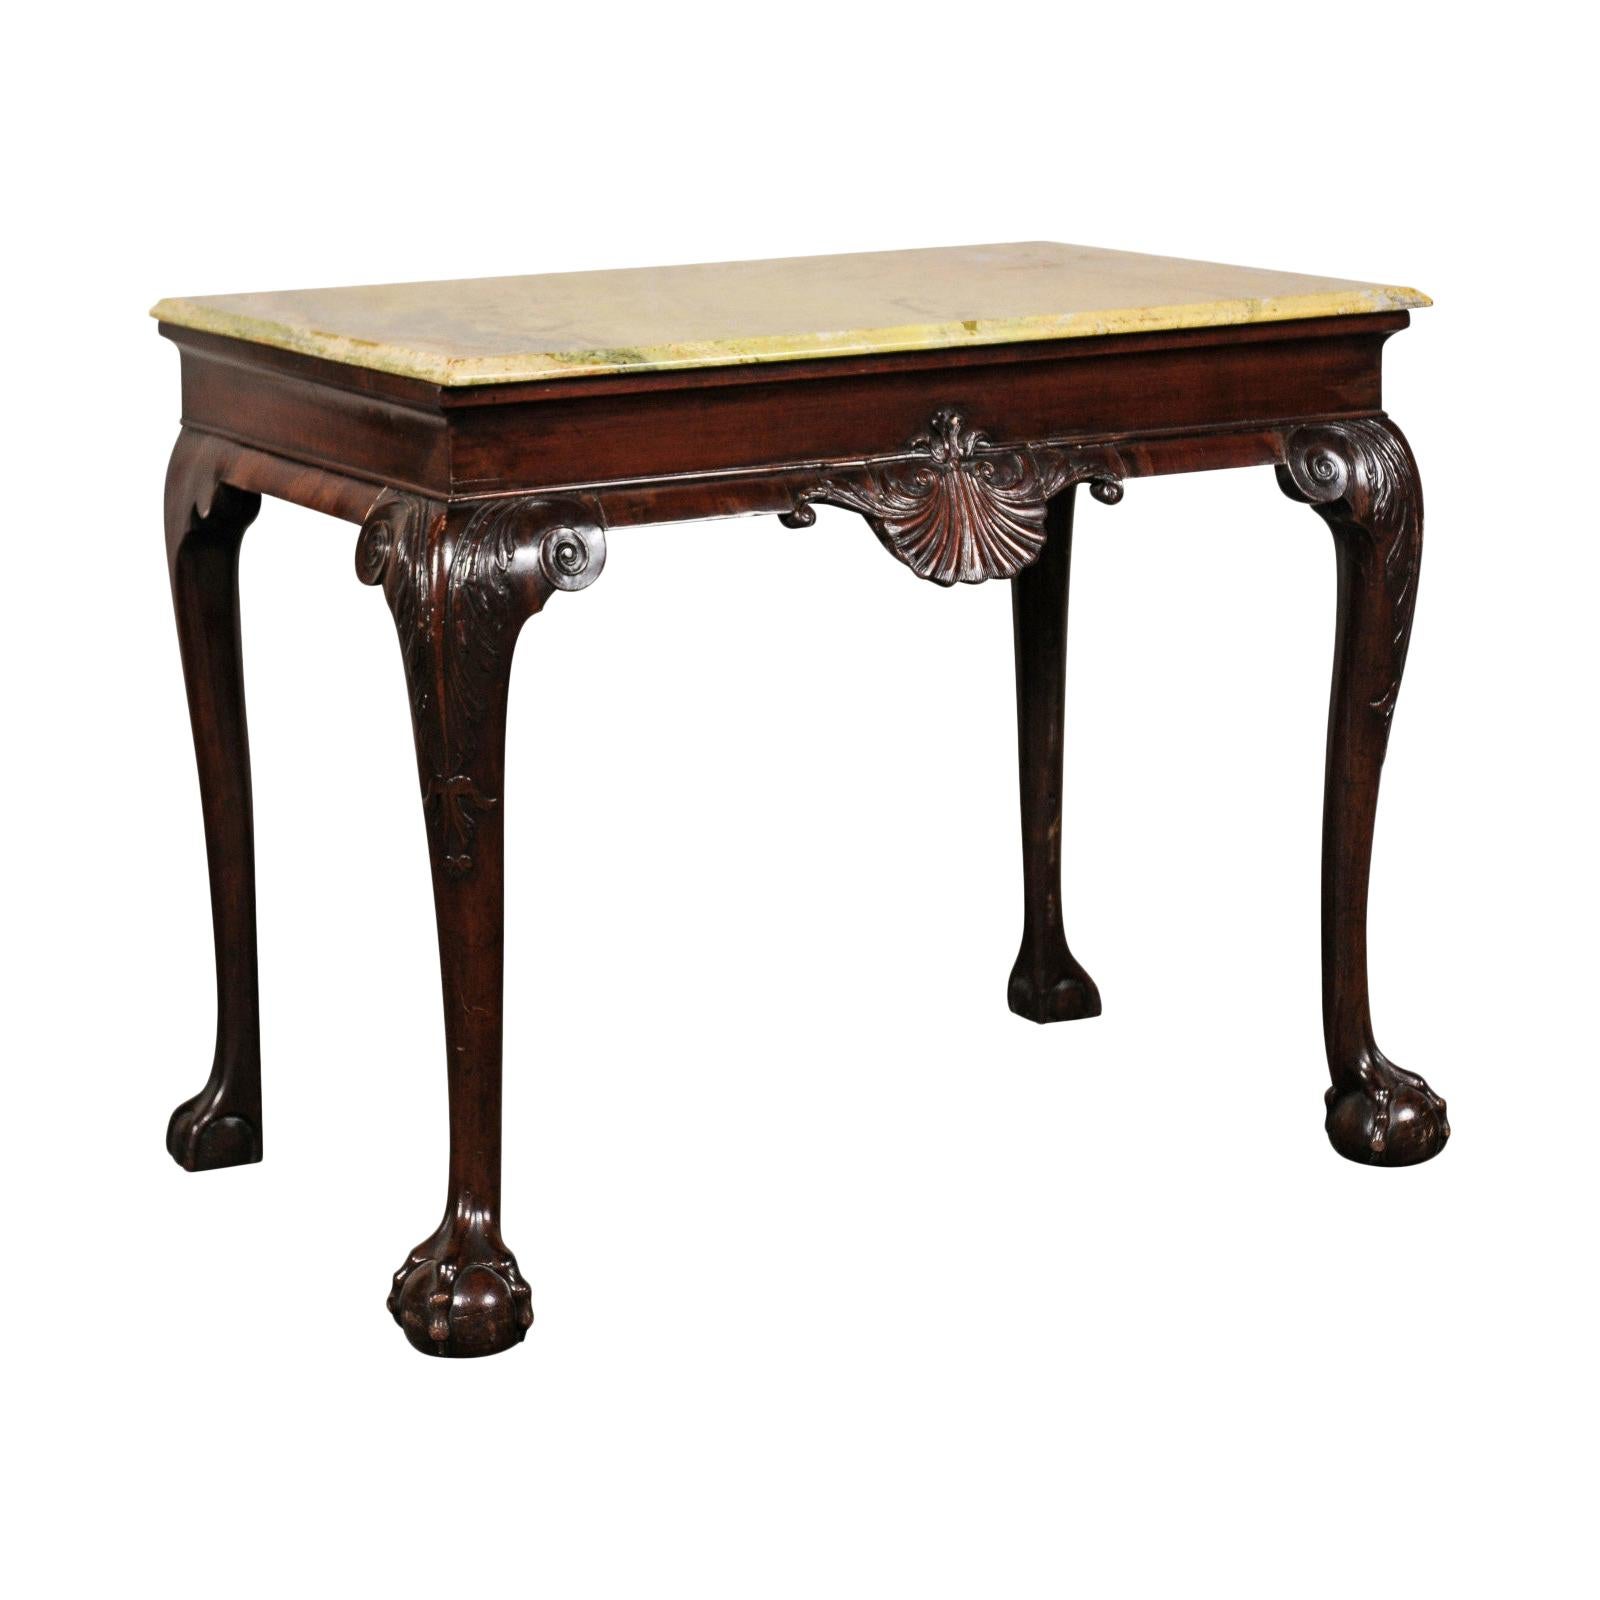 Anglo-Irish Mahogany Slab Serving Table with Shell Motif, Paw Feet For Sale